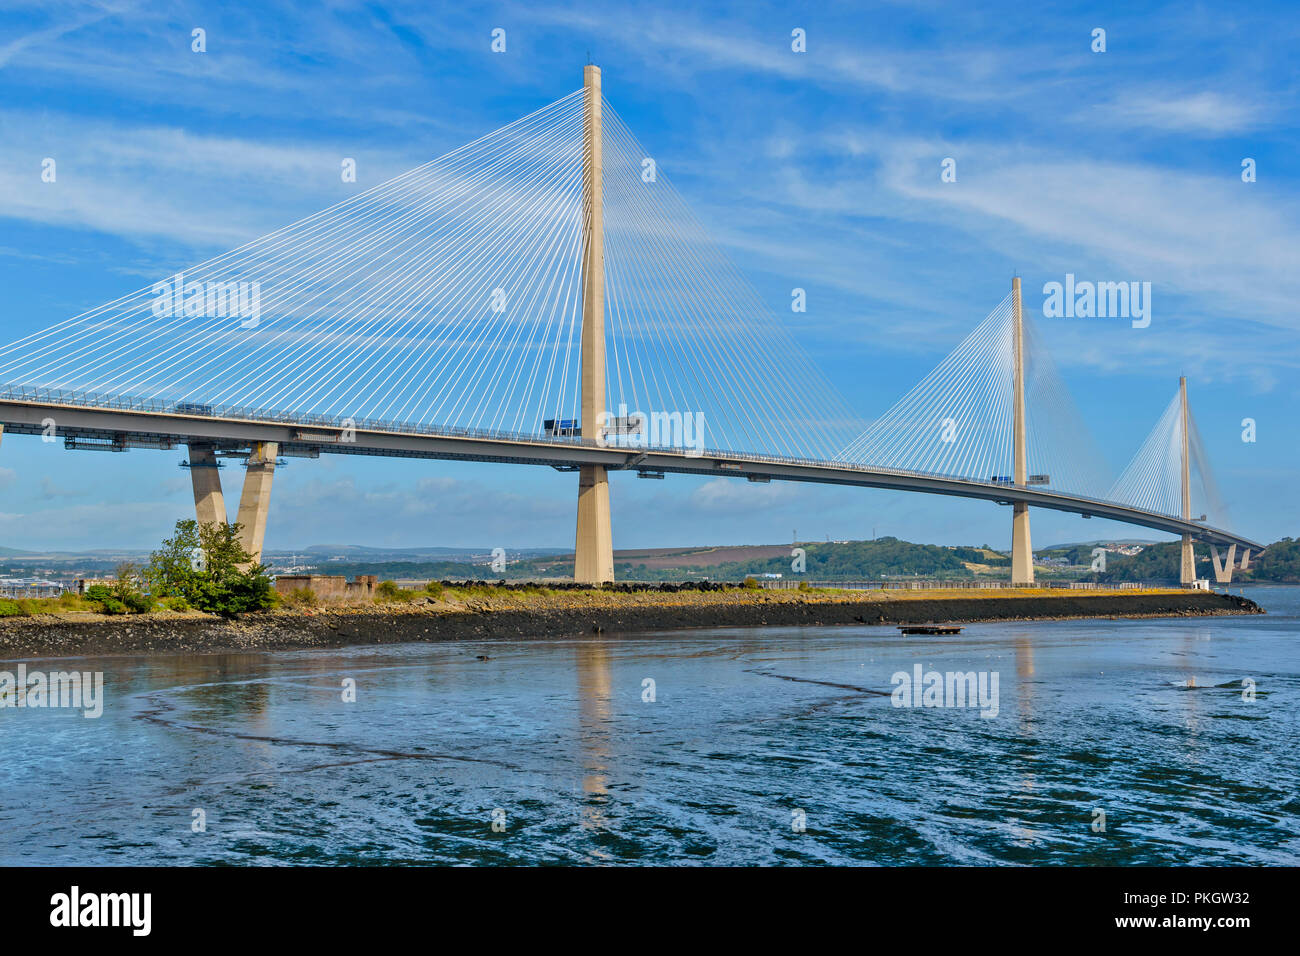 QUEENSFERRY CROSSING FIRTH OF FORTH SCOTLAND BRIDGE AT LOW TIDE AND EARLY MORNING SUNSHINE ON THE CABLES Stock Photo